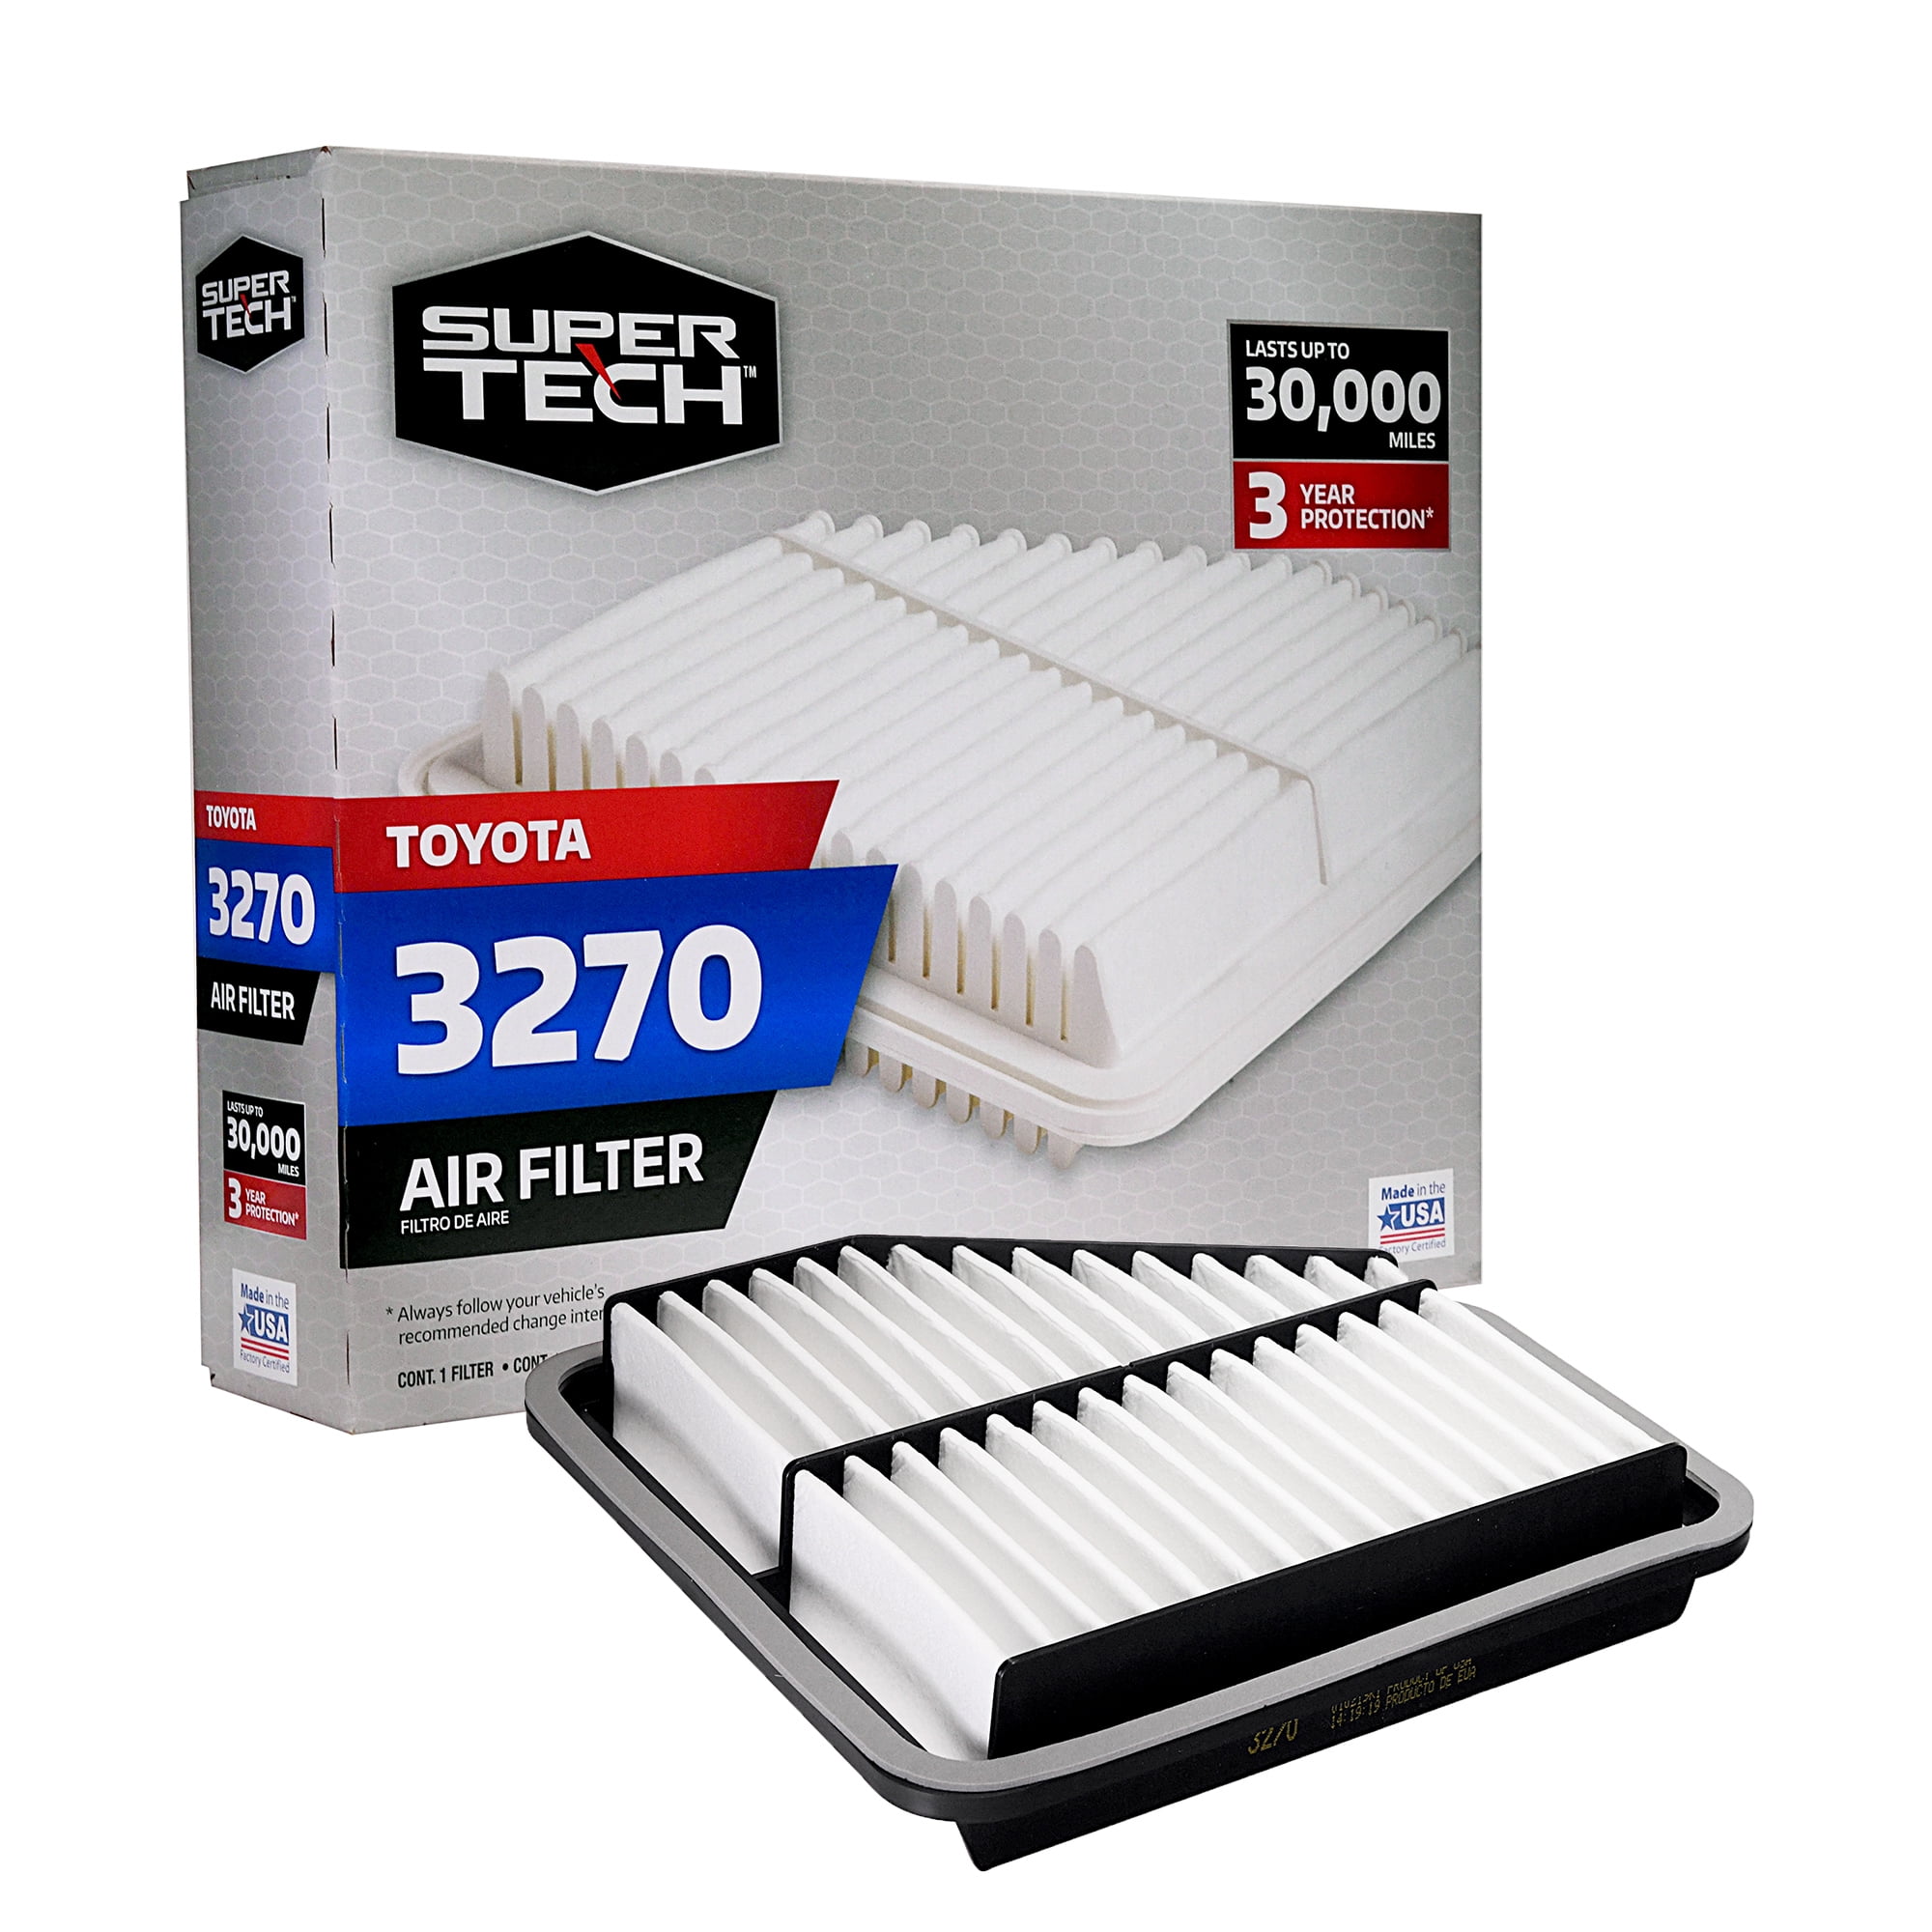 SuperTech 3270 Engine Air Filter, Replacement Filter for Toyota